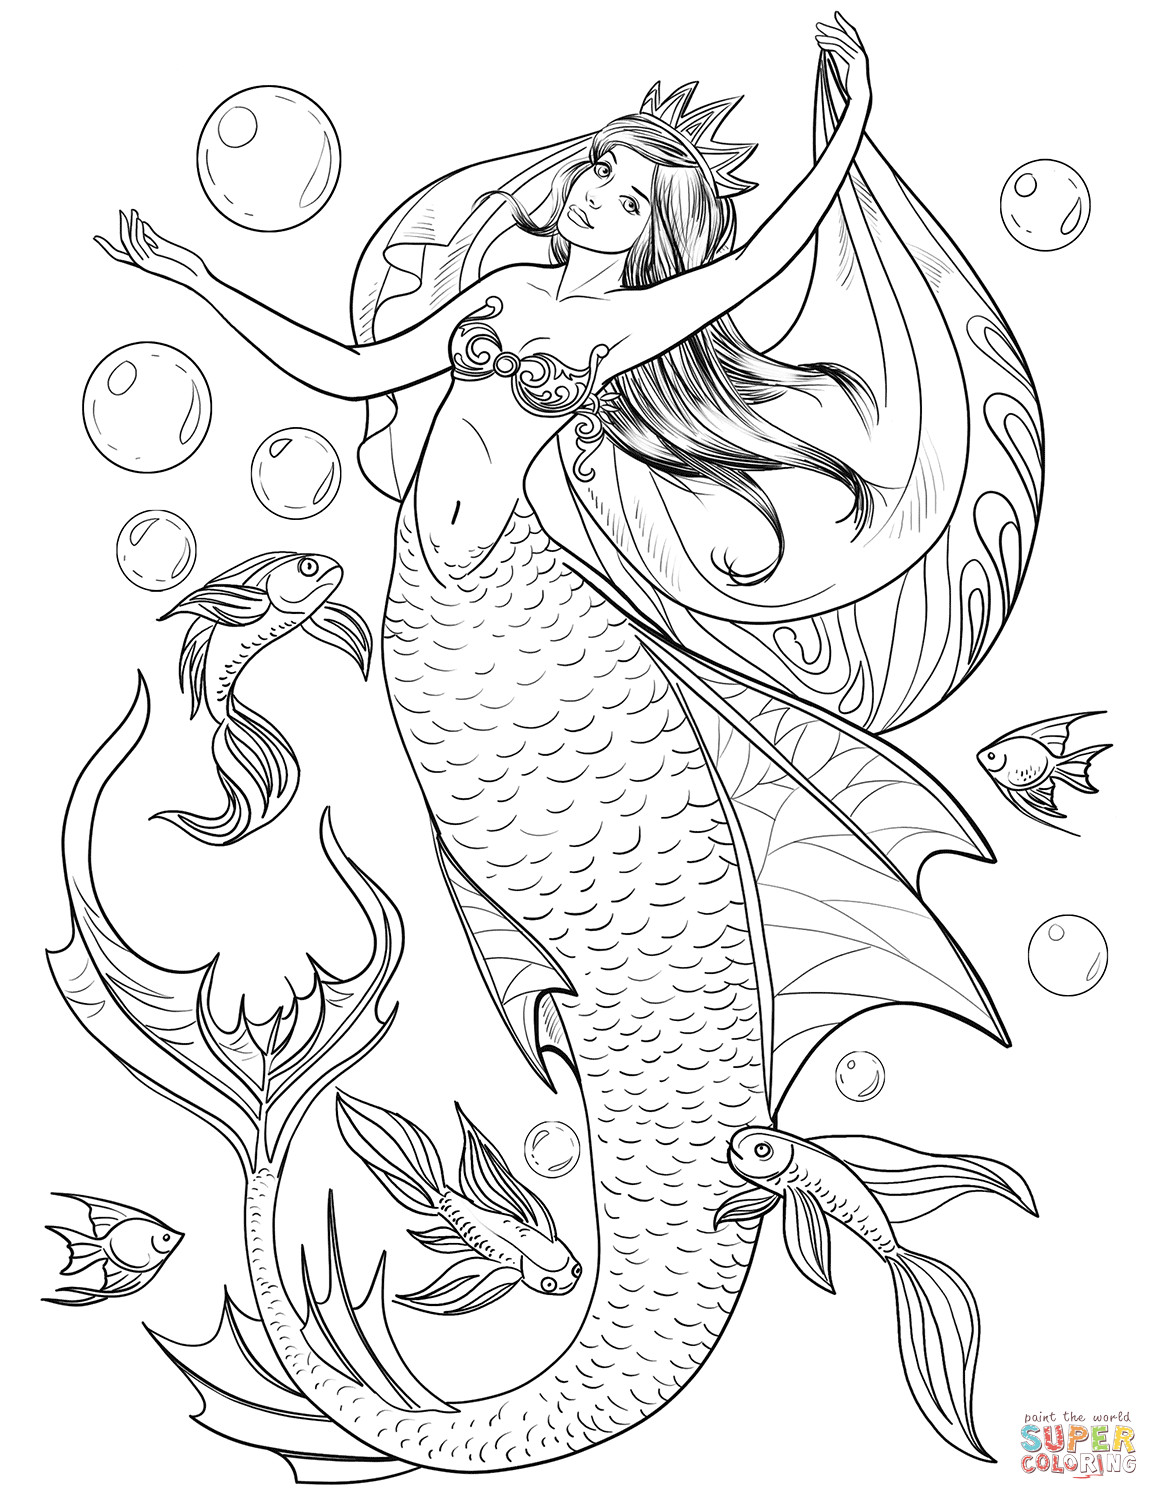 magnifique-coloriage-sirene-facile-images-mermaid-coloring-pages-my